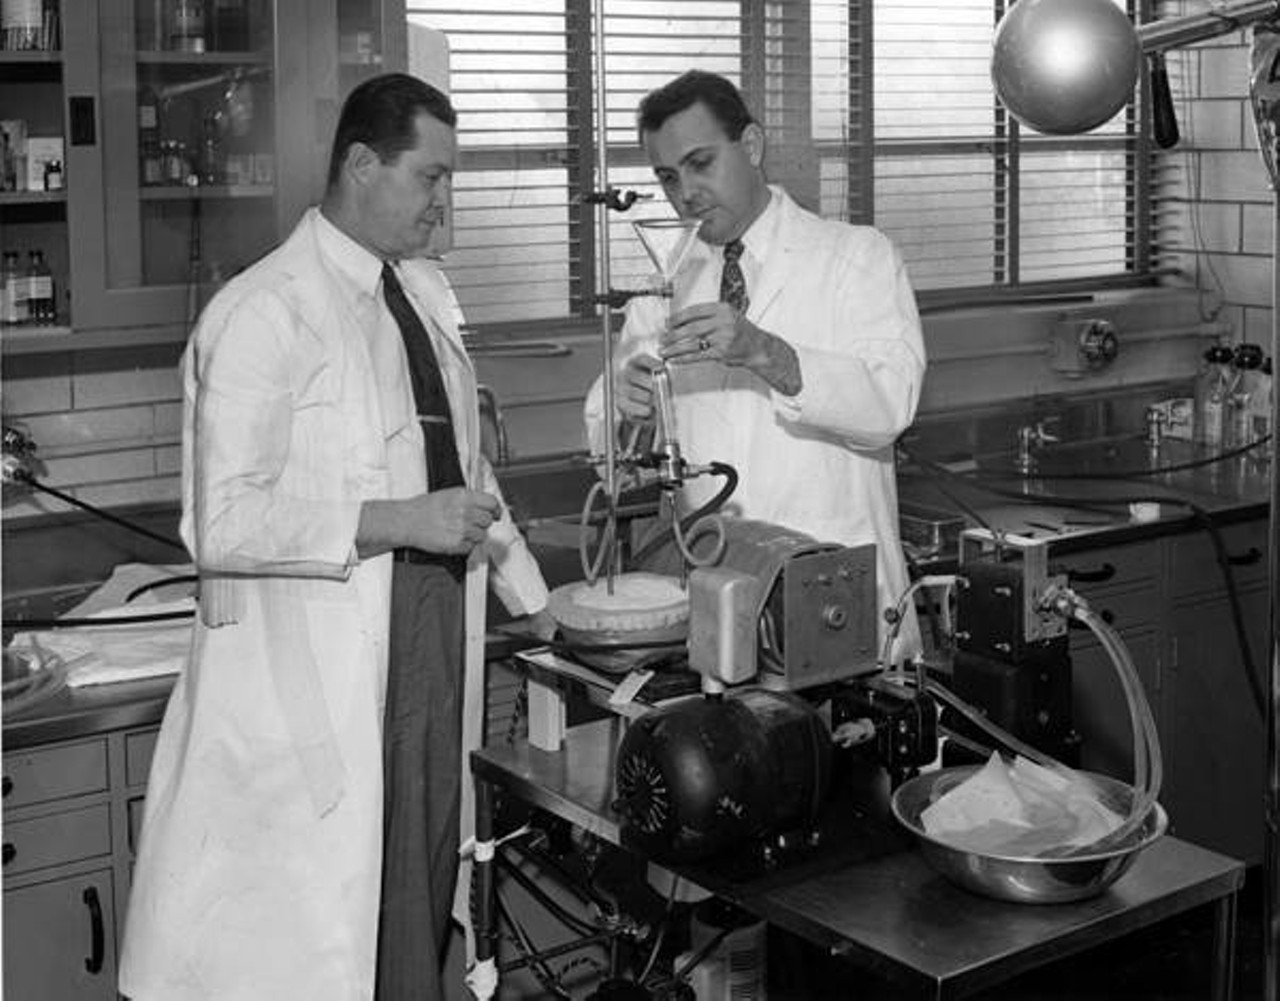  Drs. Earl B. Kay (left) and Frederick Cross of St. Luke's Hospital Adjust Their Heart-Lung Machine, 1956 